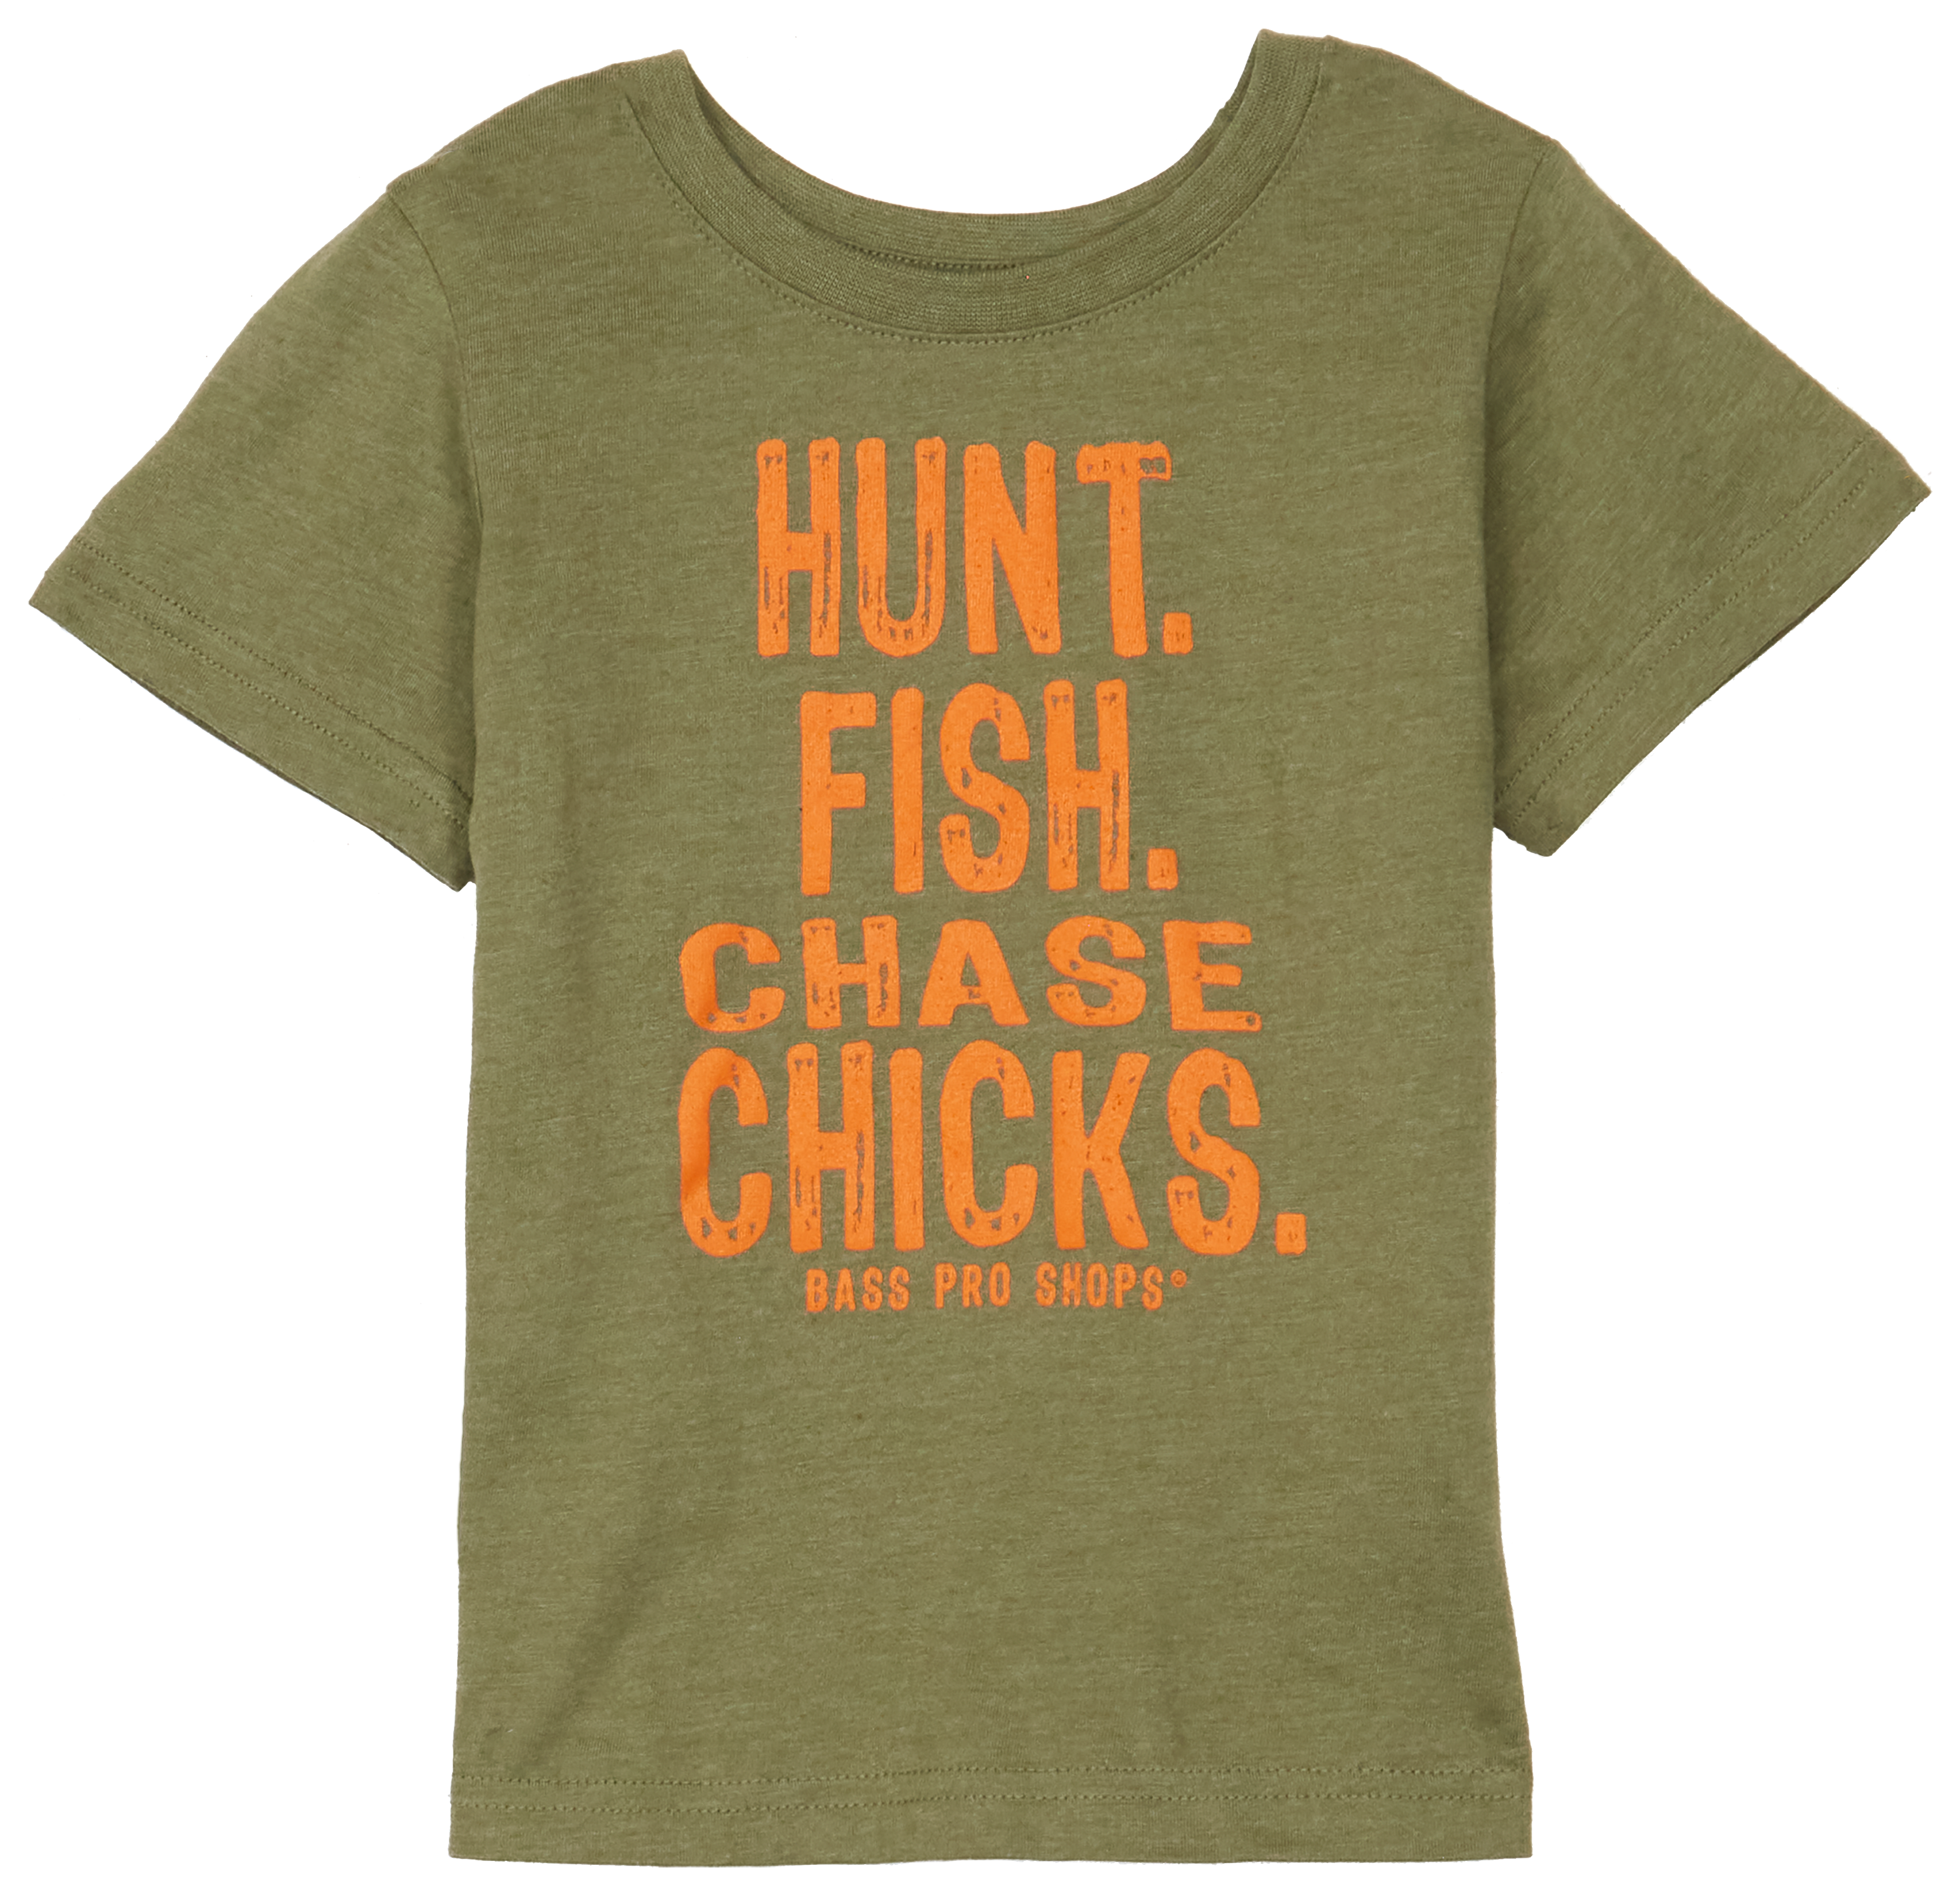 Bass Pro Shops Hunt Fish Chase Chicks Short-Sleeve T-Shirt for